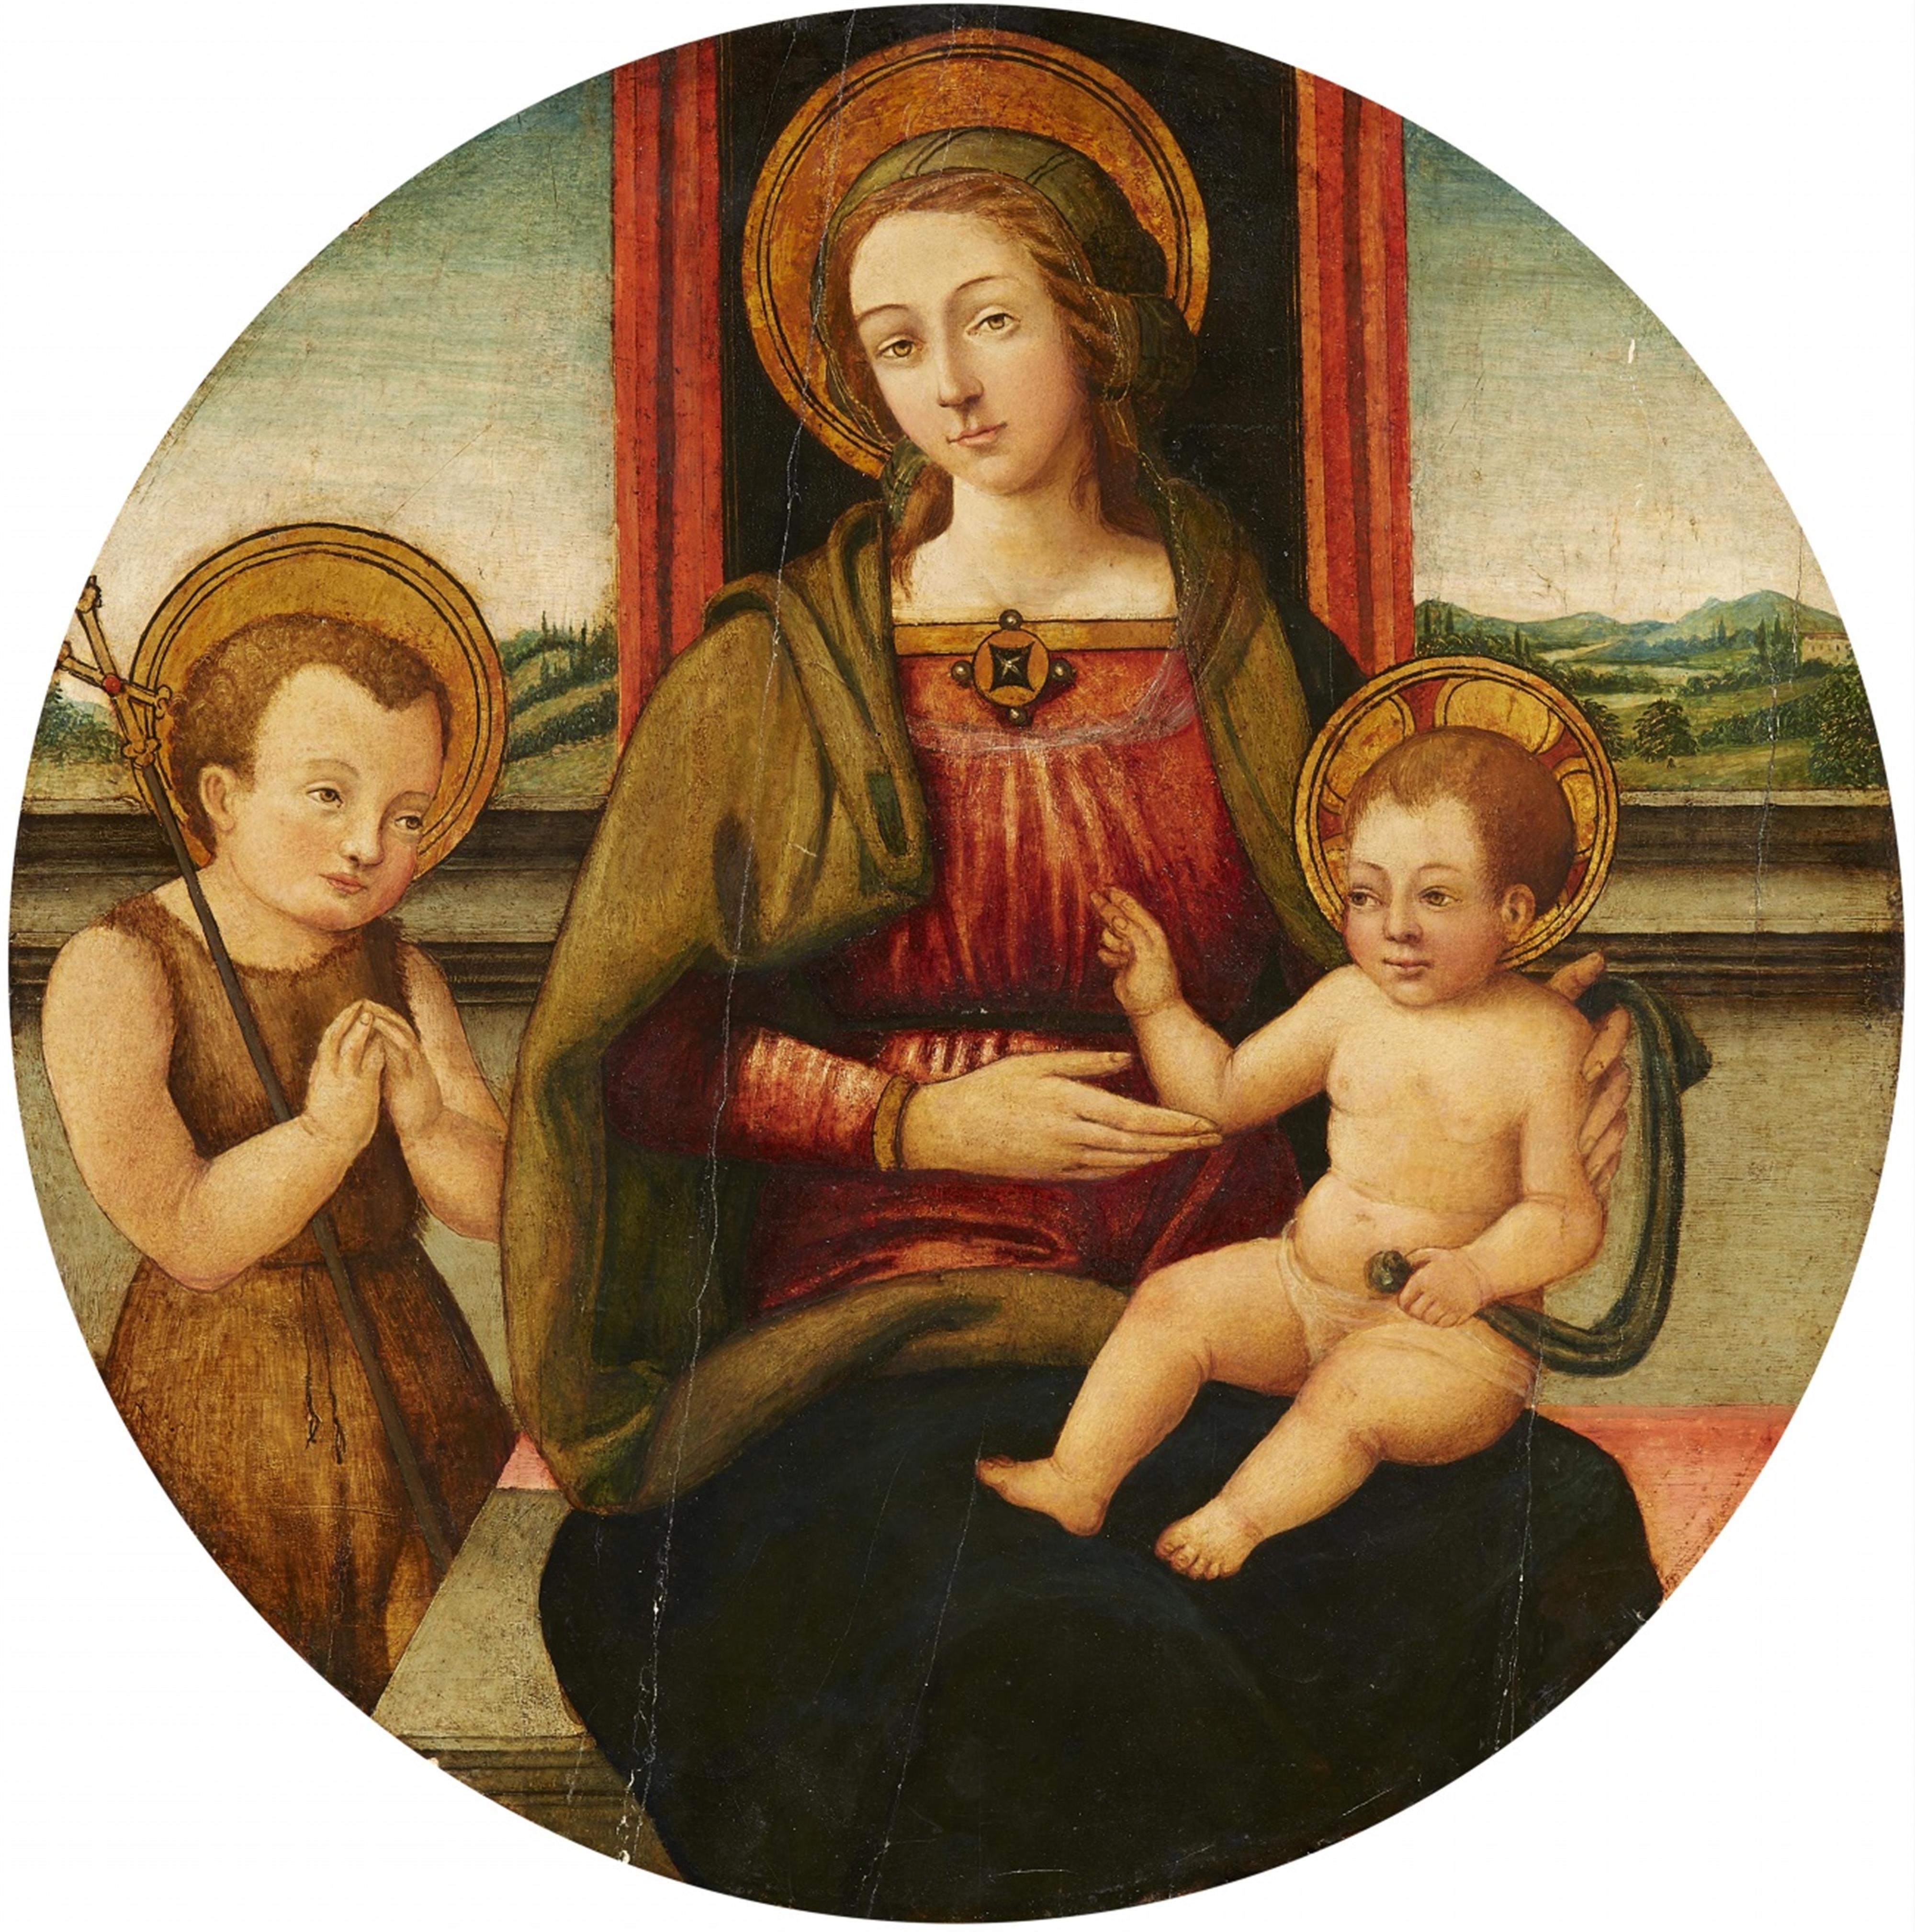 Tuscan School 16th Century - The Virgin and Child - image-1